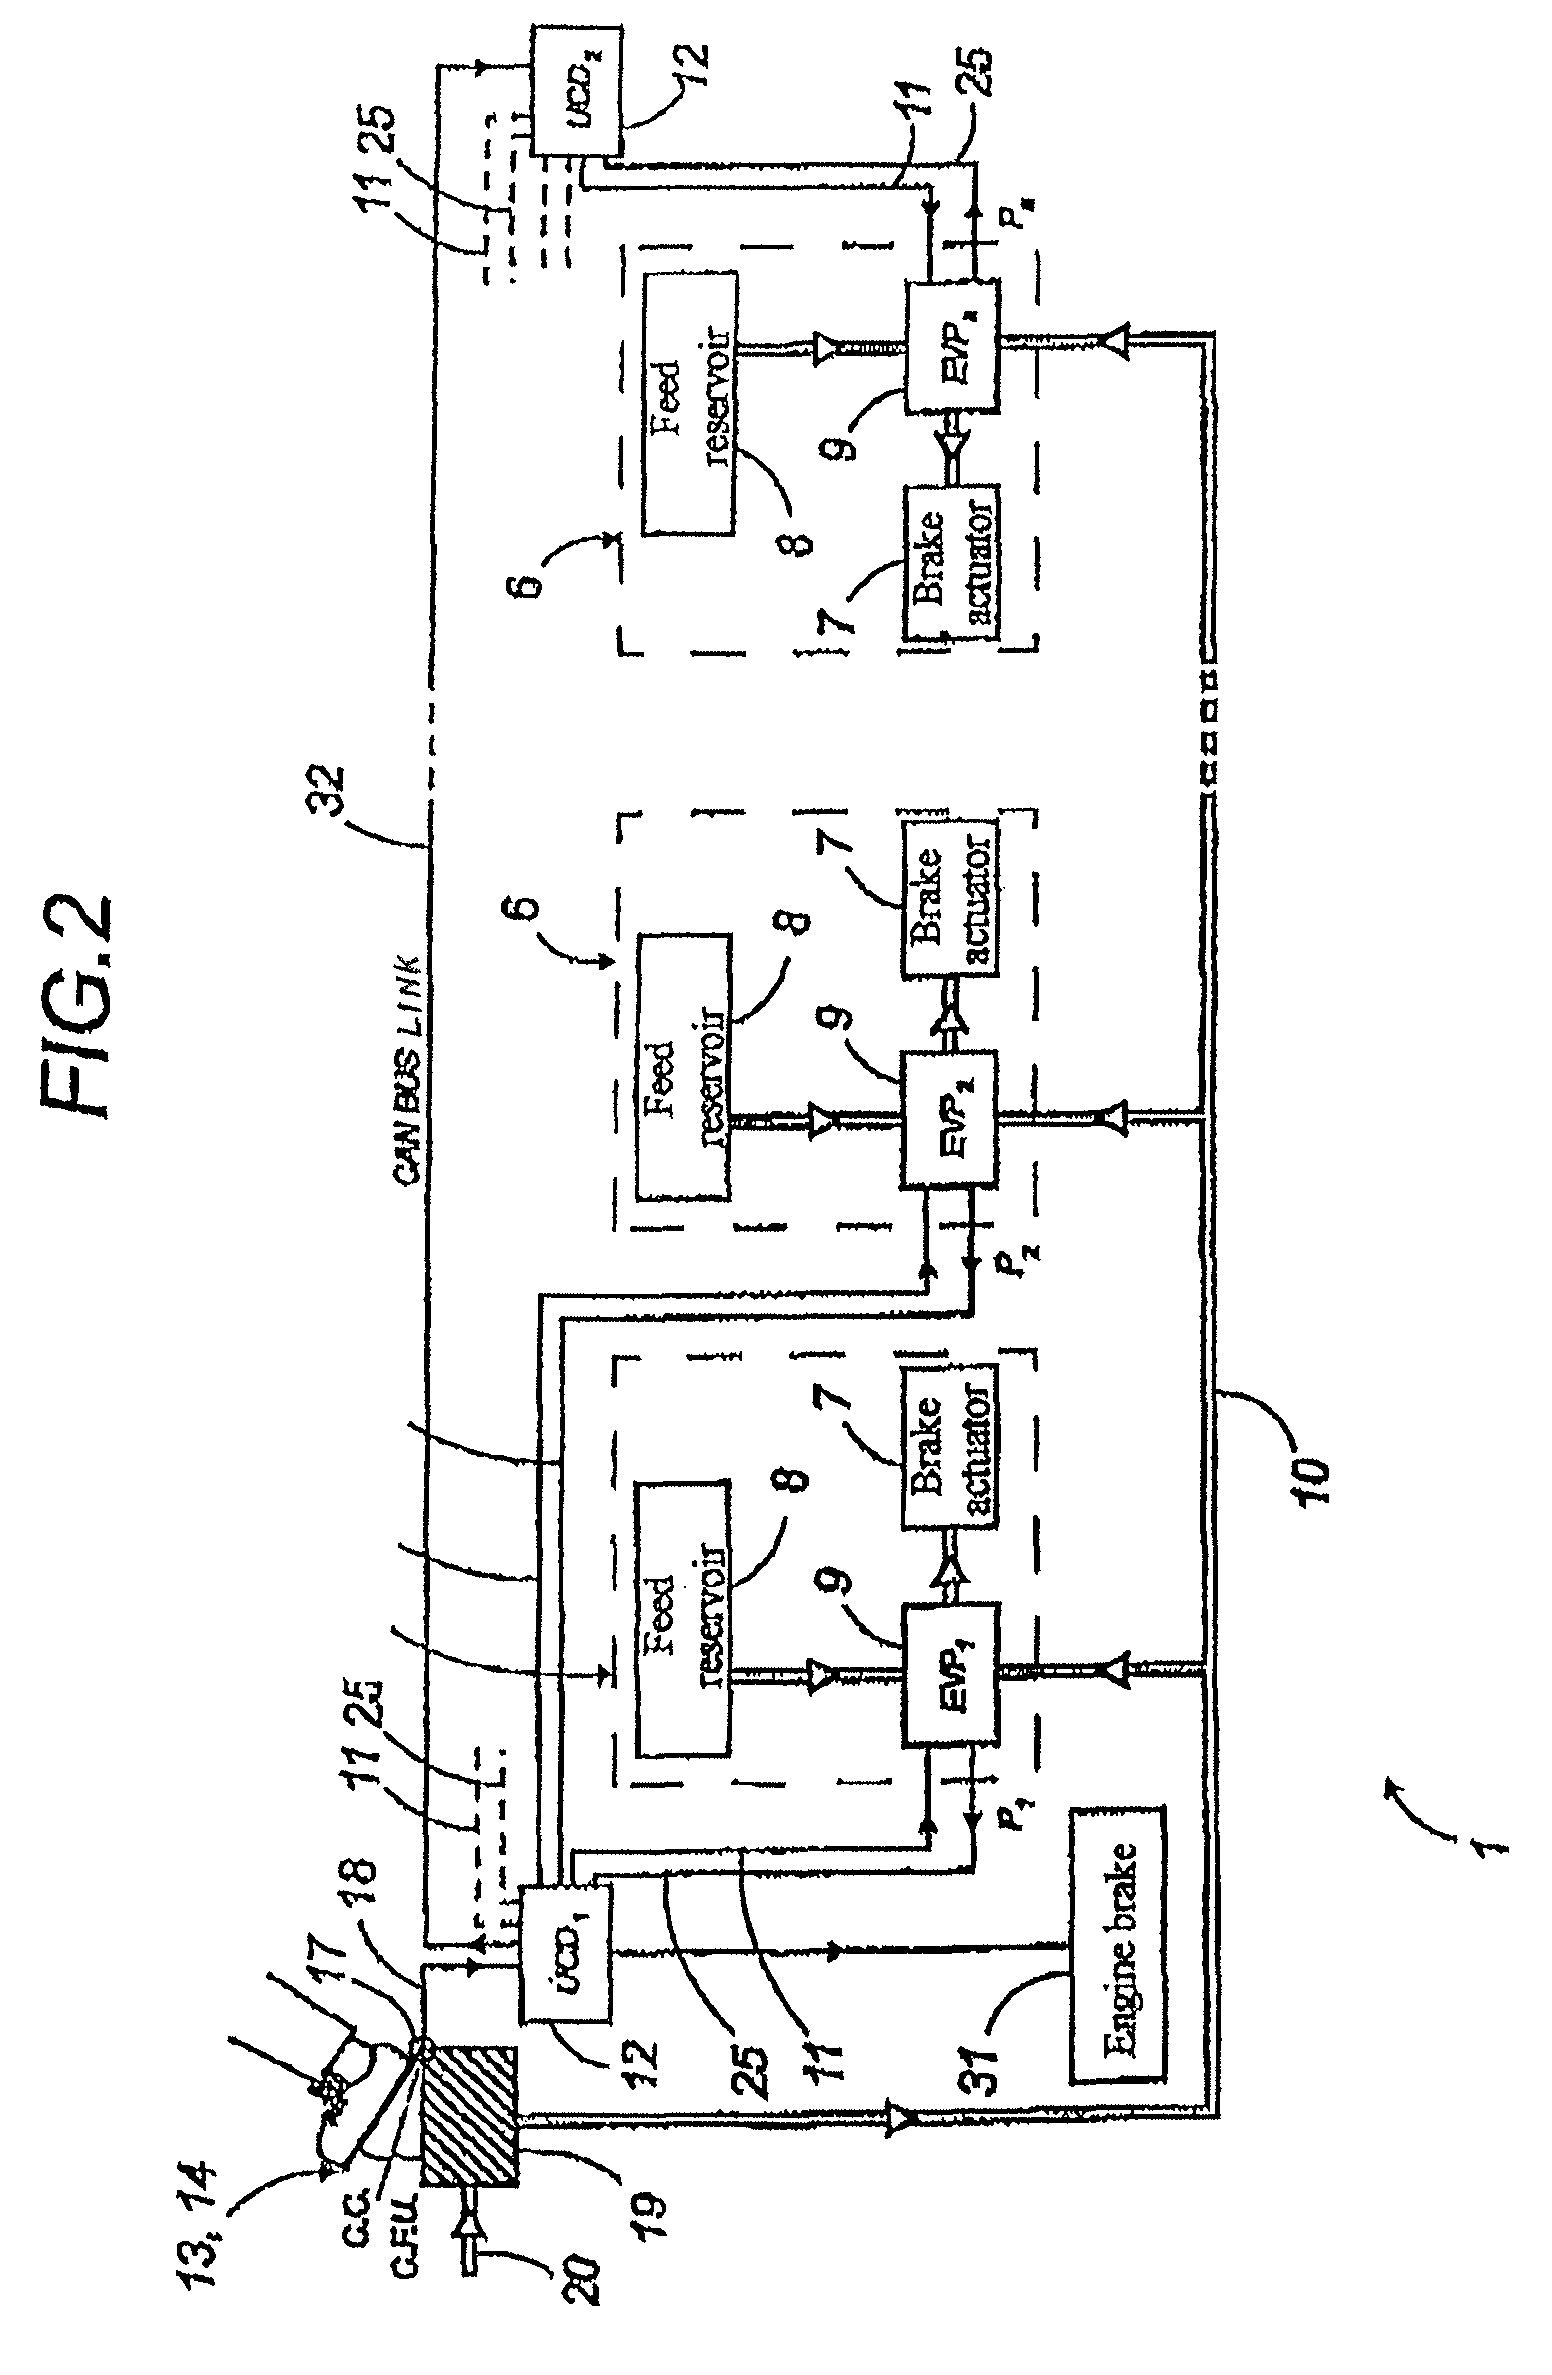 Two-stage electromechanically controlled braking system for a multiaxle road vehicles